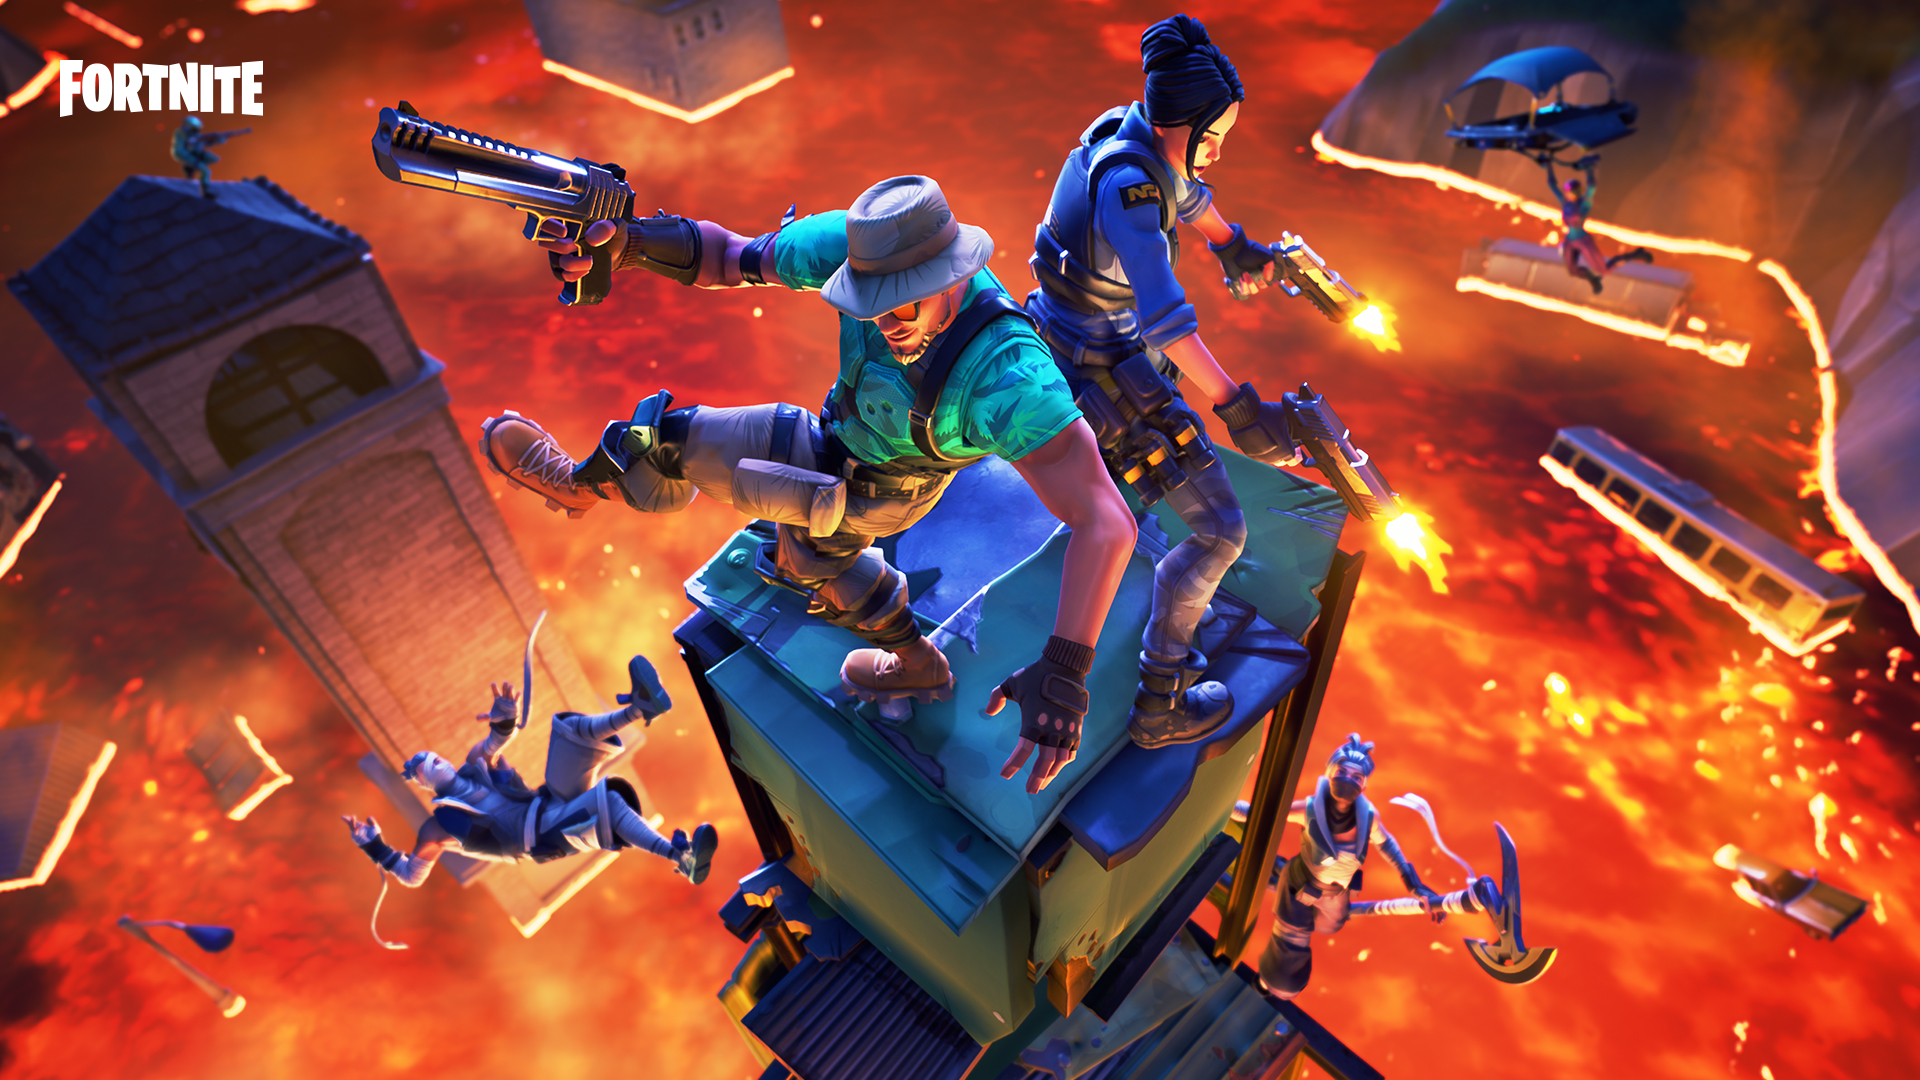 fortnite players might be able to gift the battle pass in season 9 - season 9 battle pass in fortnite